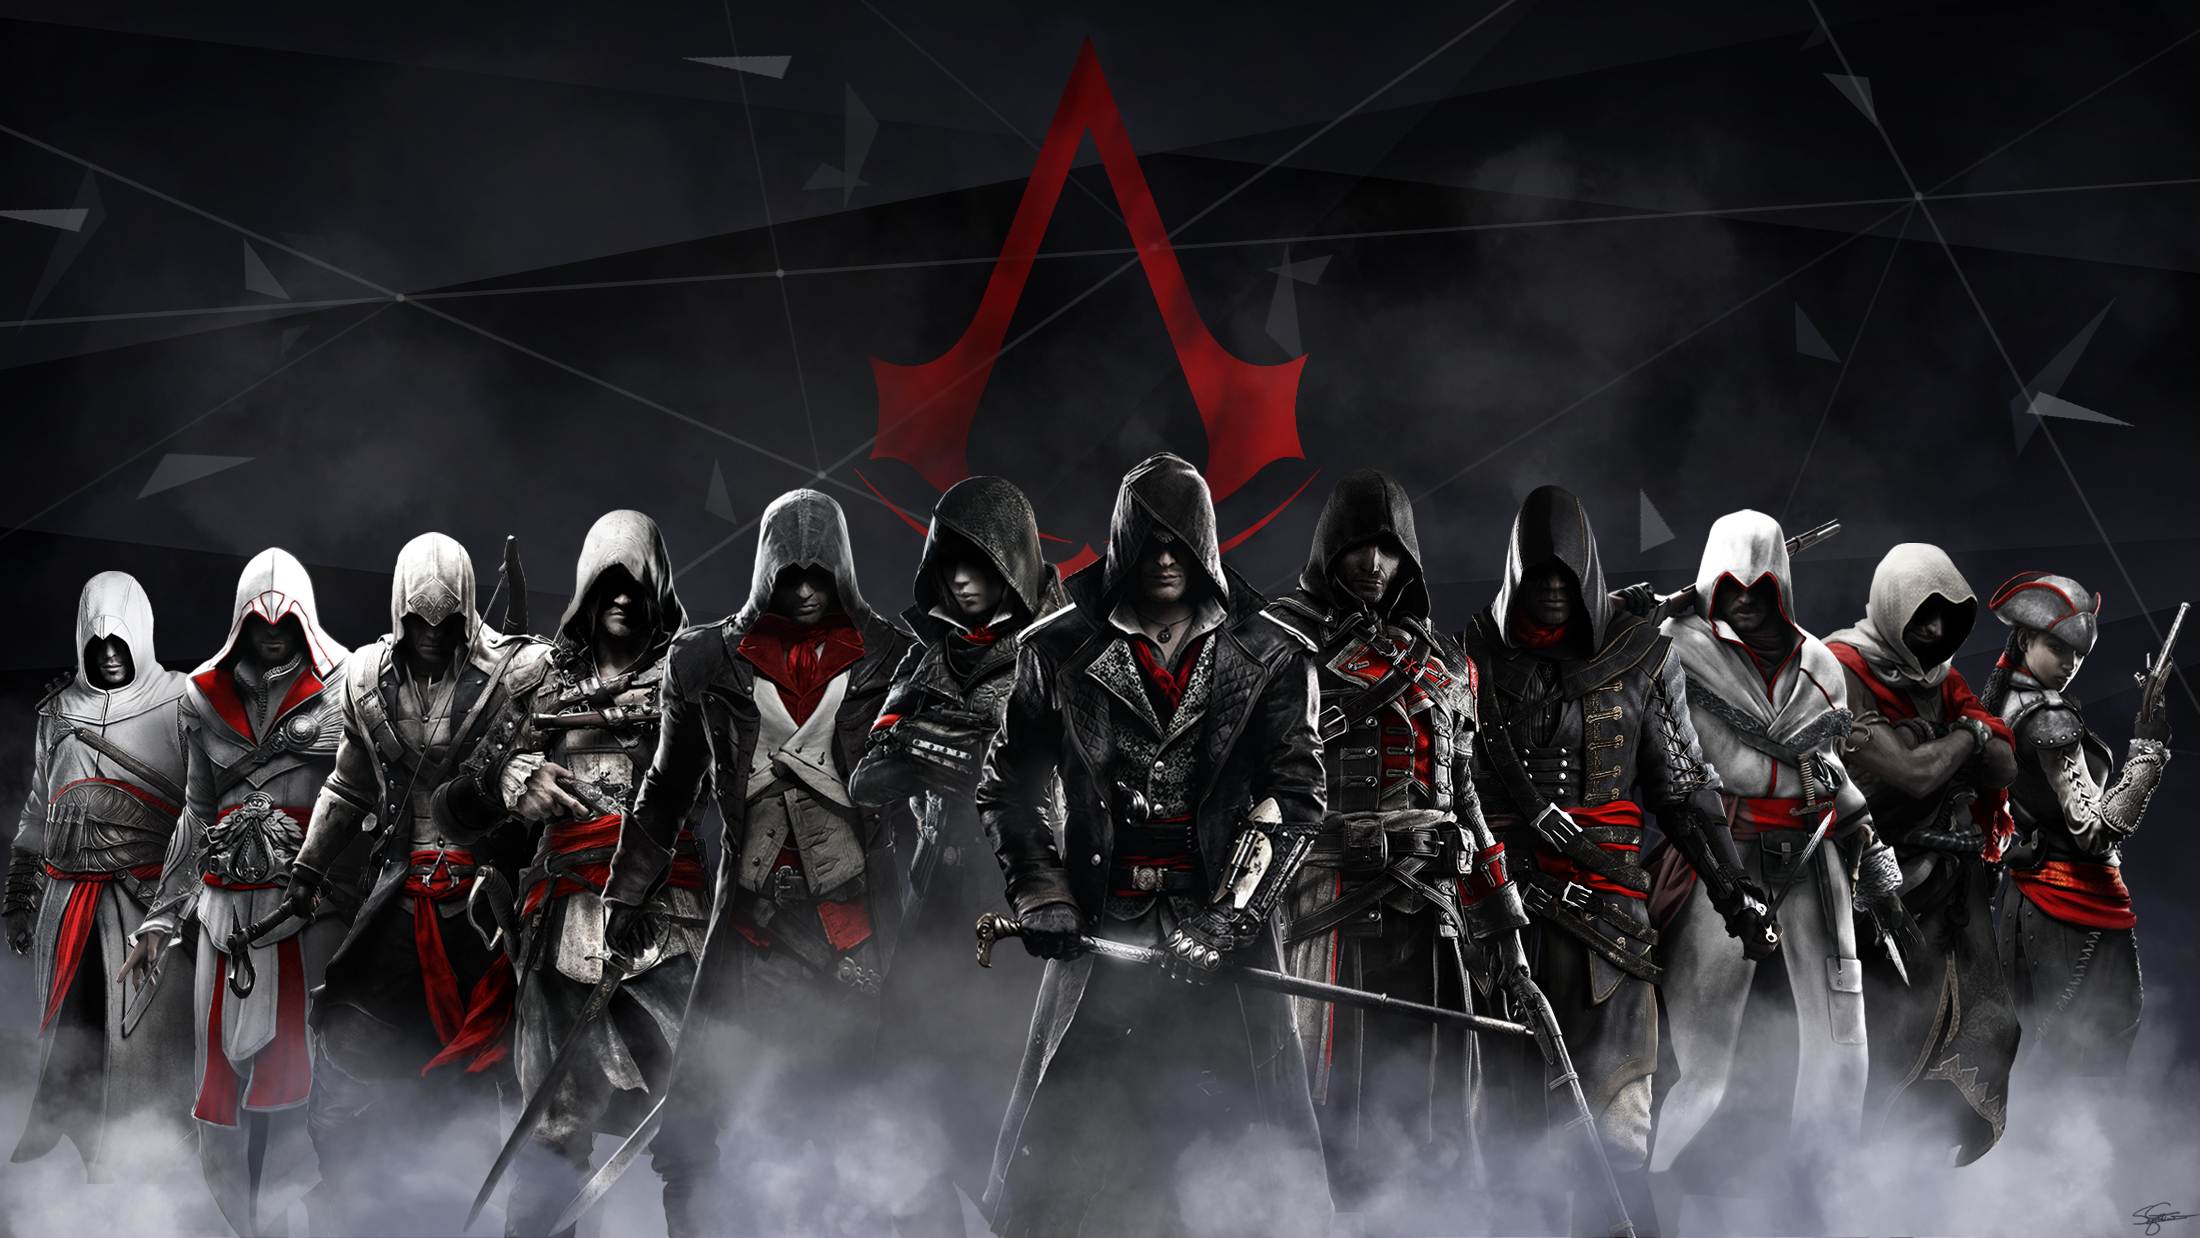 Assassins Creed Wallpaper Updated Full HD by GianlucaSorrentino